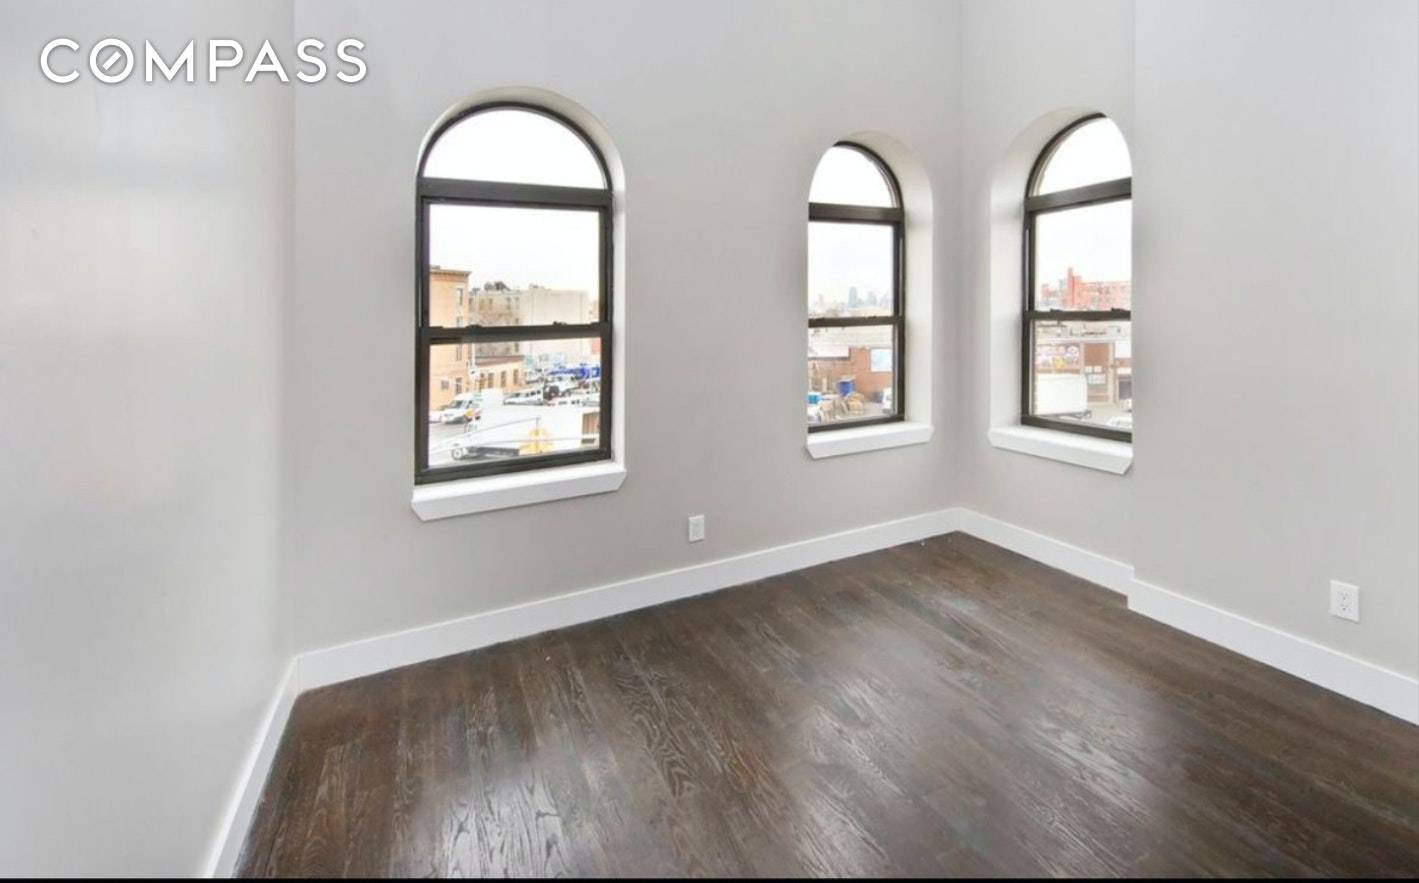 Welcome home to this spacious sun drenched 3BR 1bath, located in prime Bushwick.